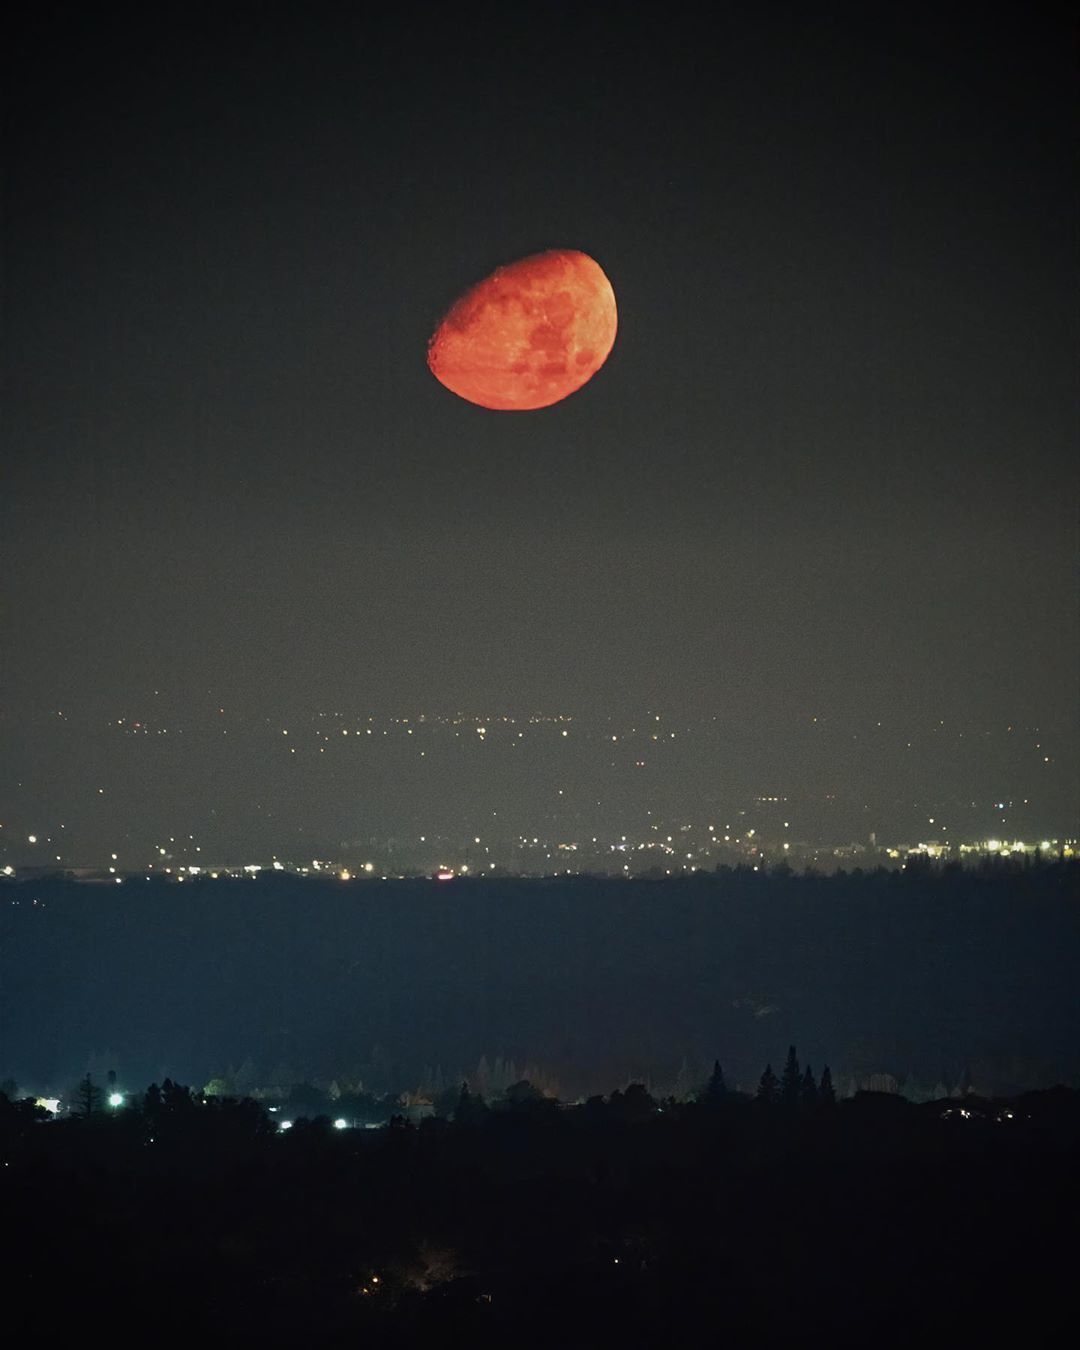 A red moon hangs over foothills ridge lines at night with city lights beyond